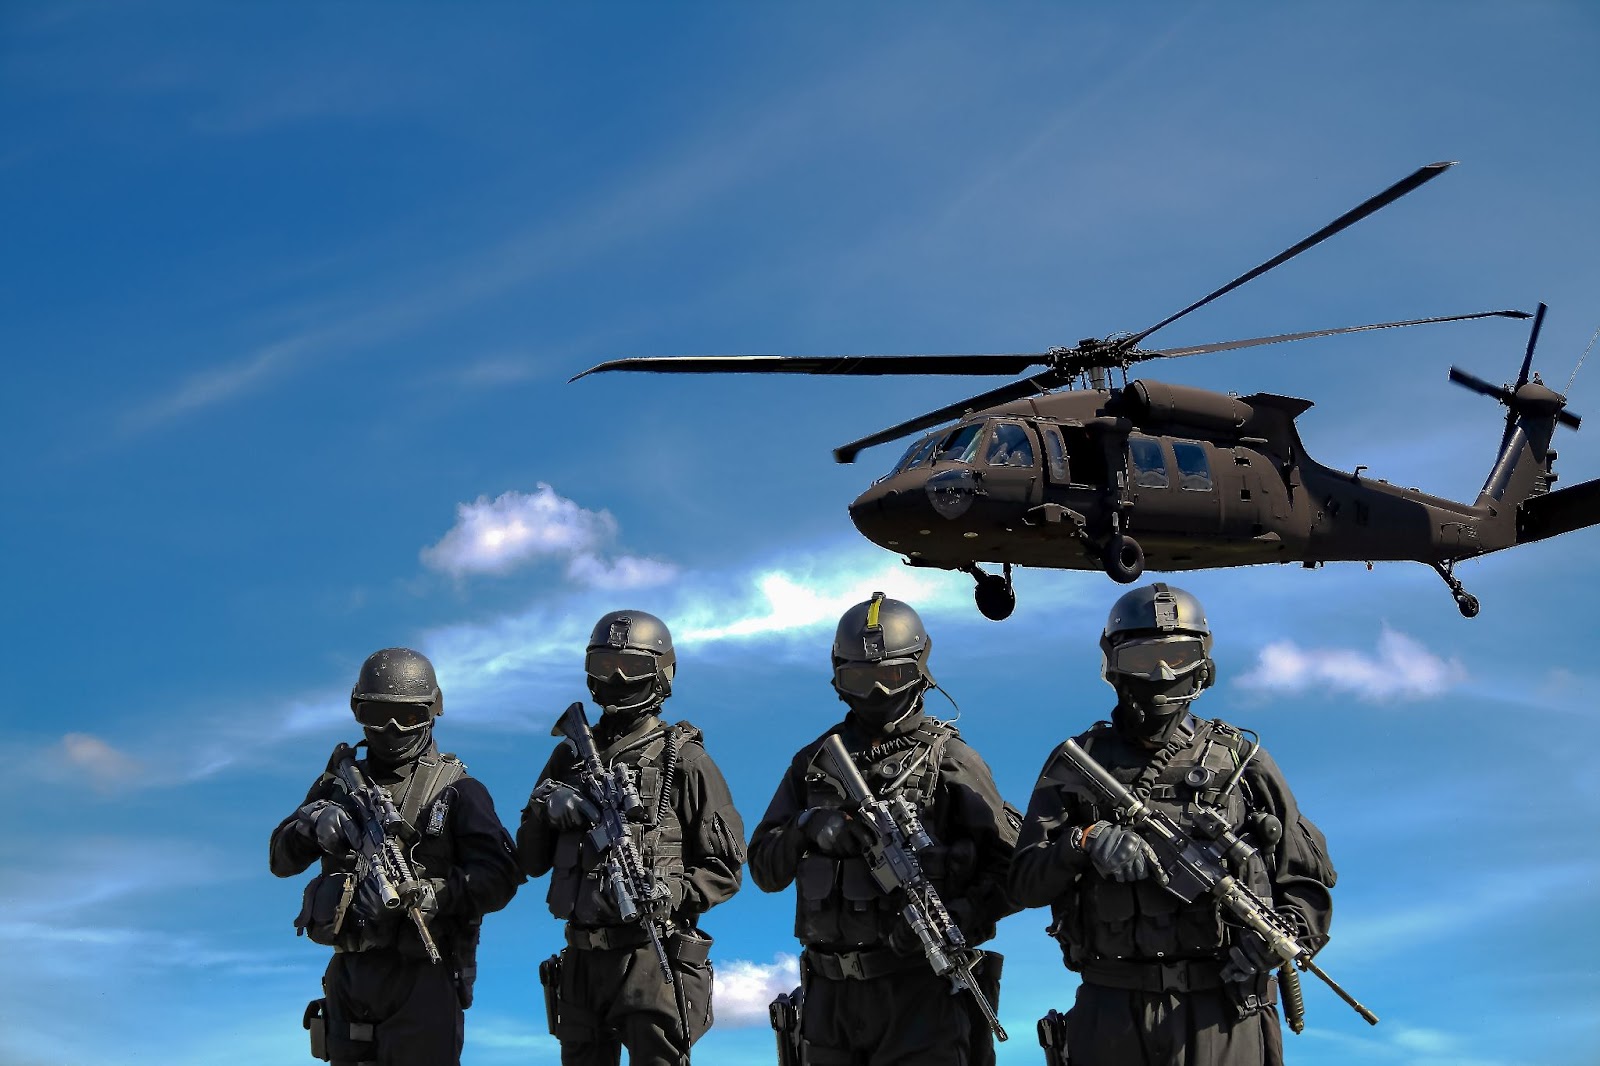 An Overview of Tactical Gear for the Military and Law Enforcement